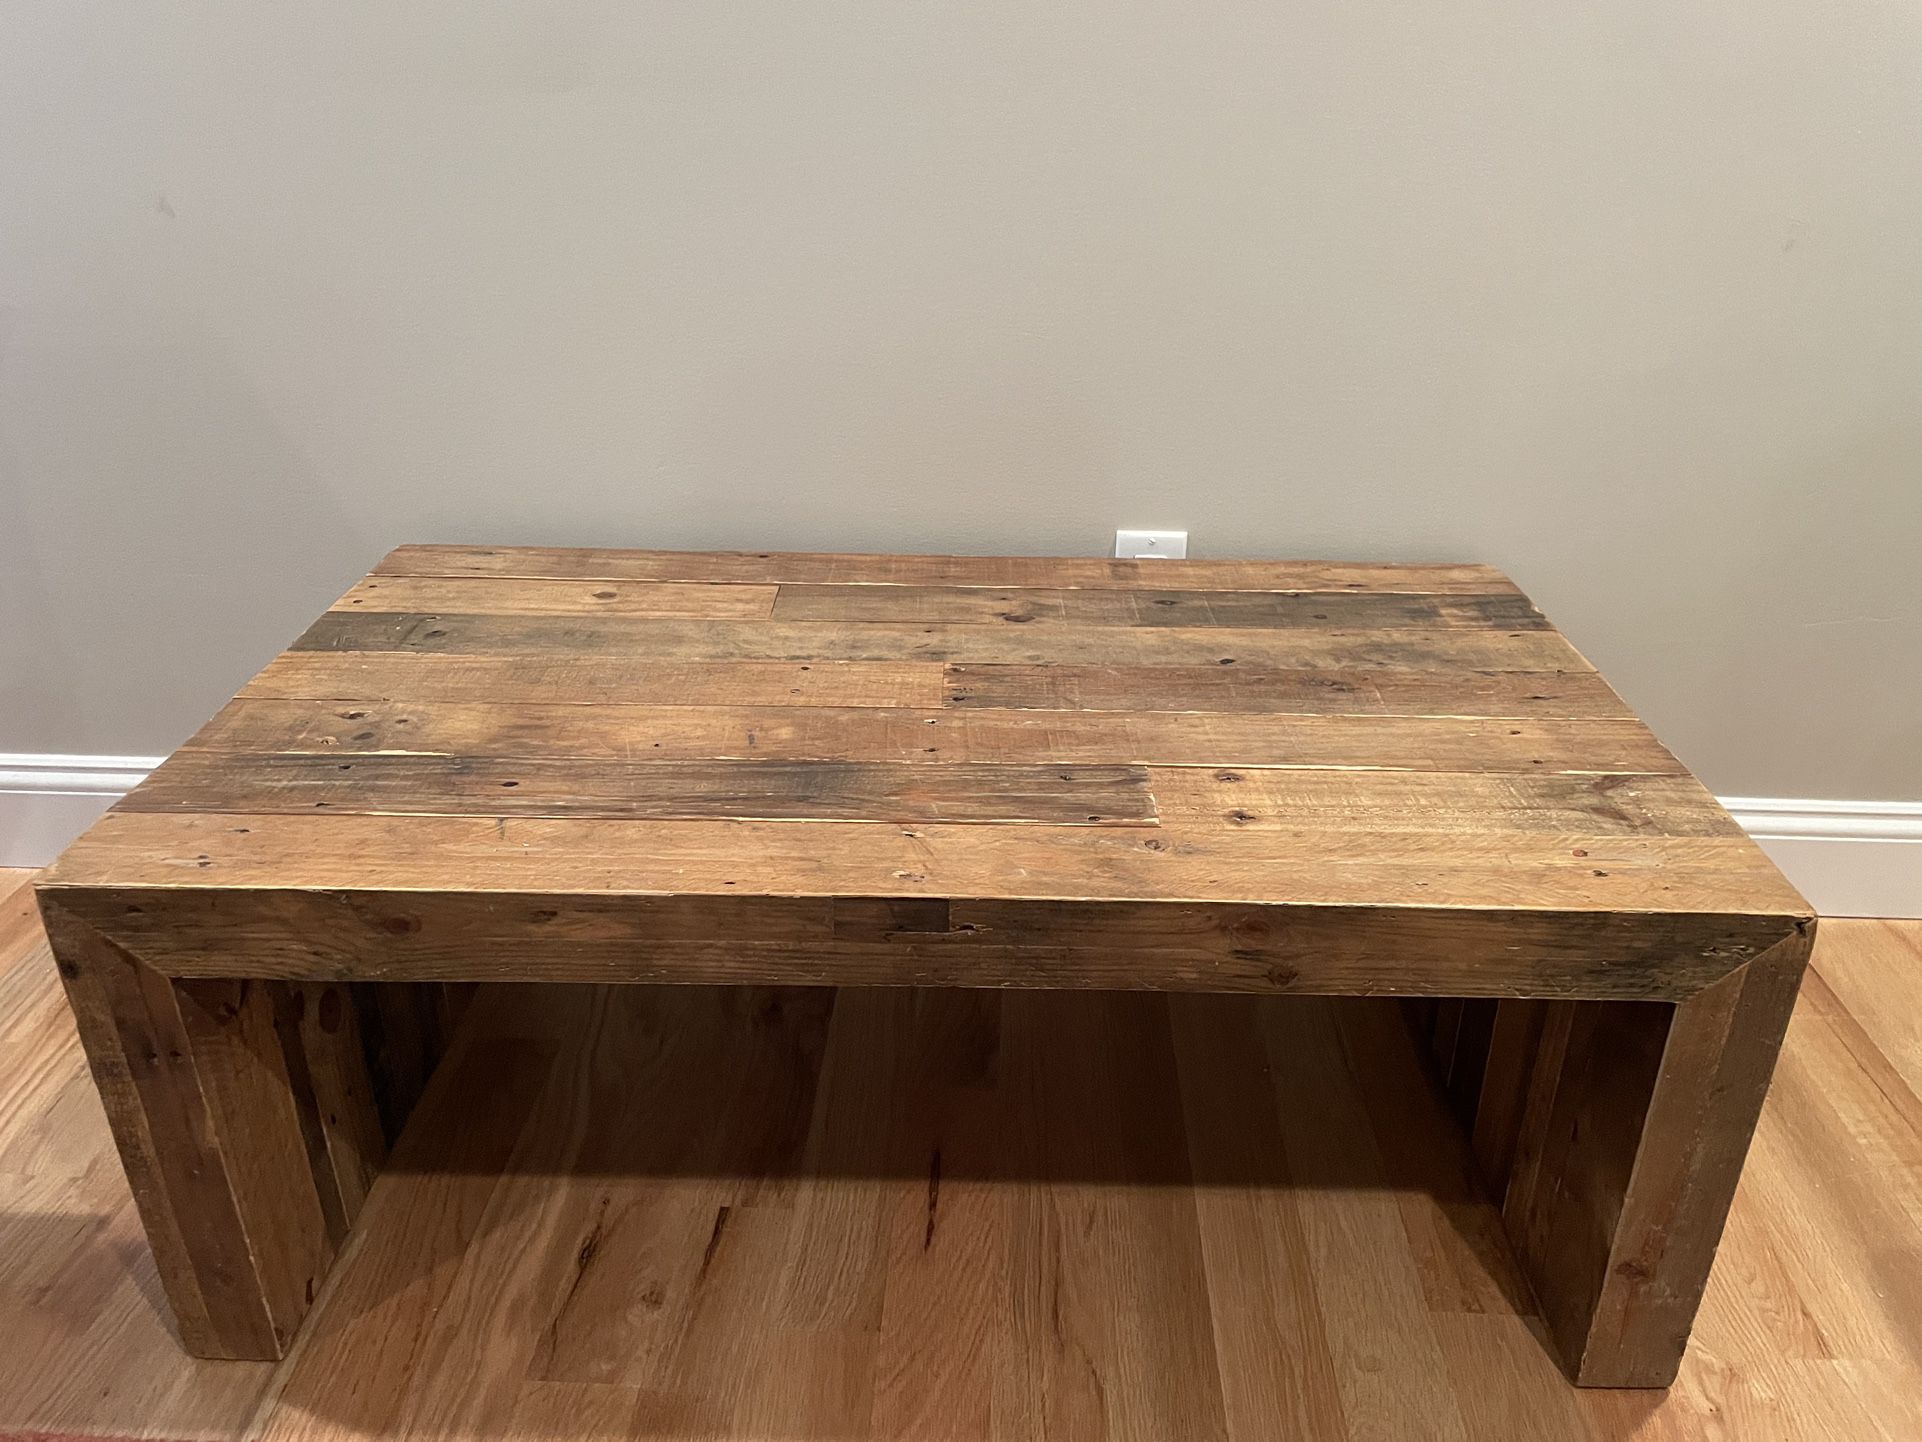 West Elm - Emmerson Reclaimed Wood Coffee Table